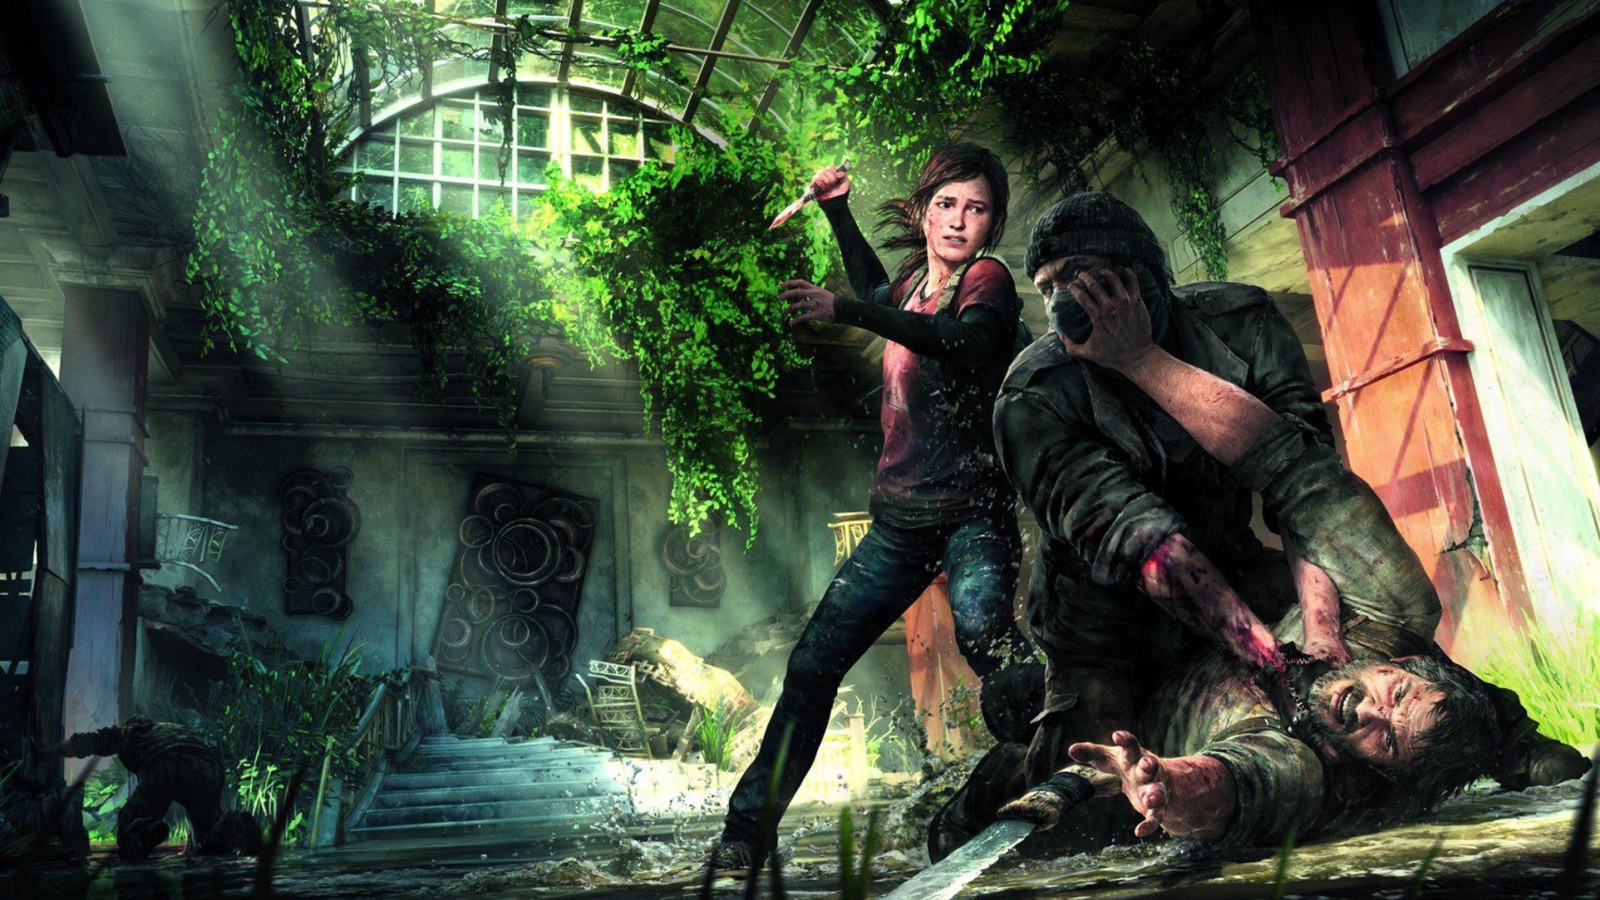 The Last Of Us Naughty Dog for Playstation 3 screenshot #1 1600x900